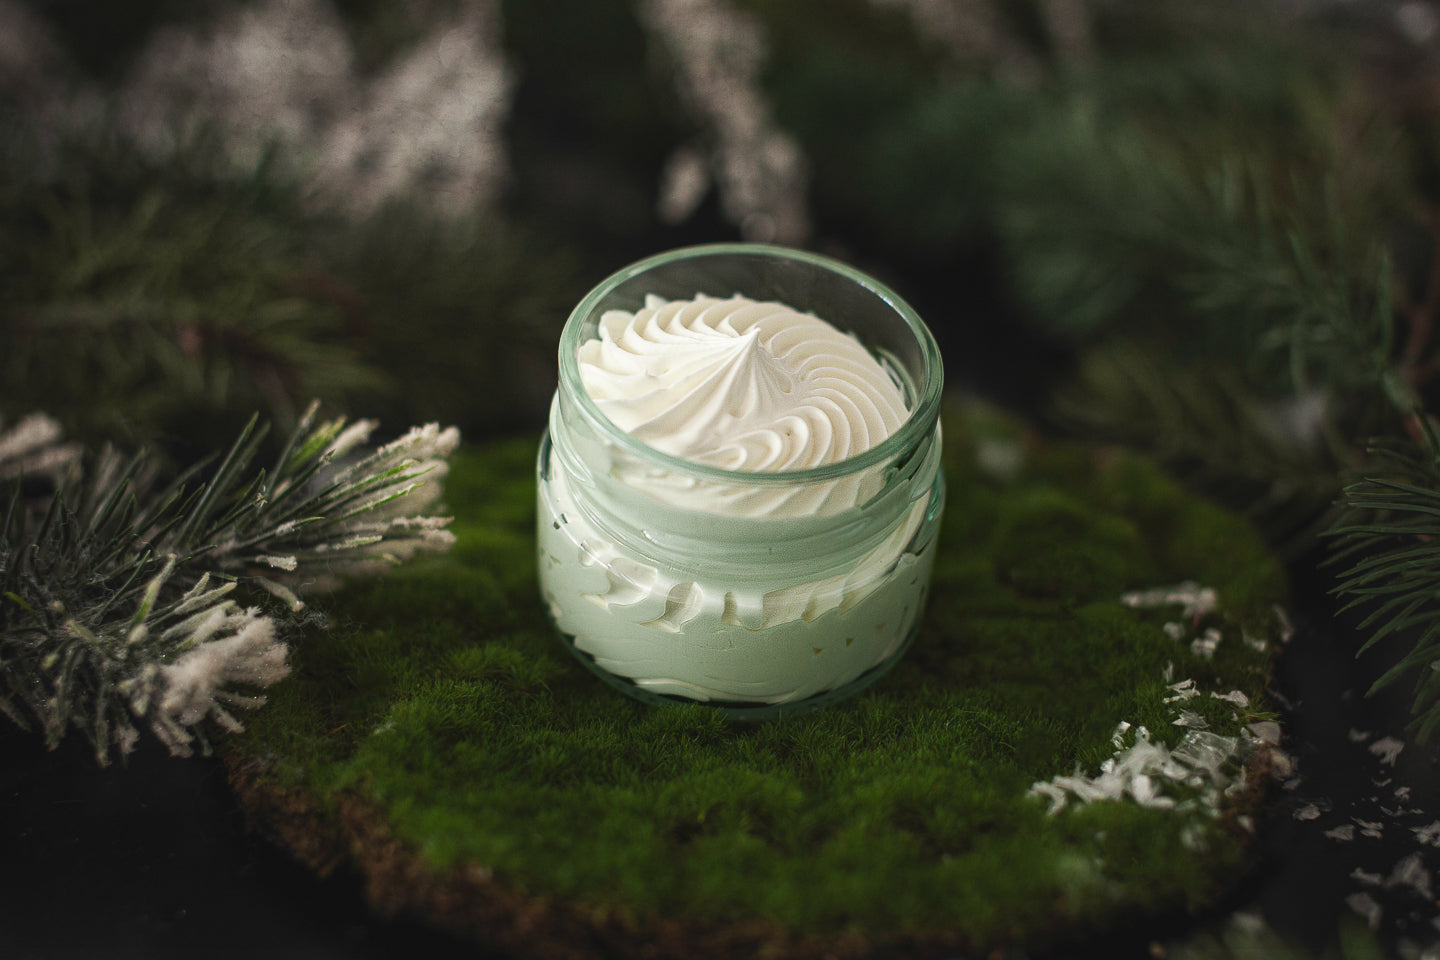 Whipped body butter: Winter Caress